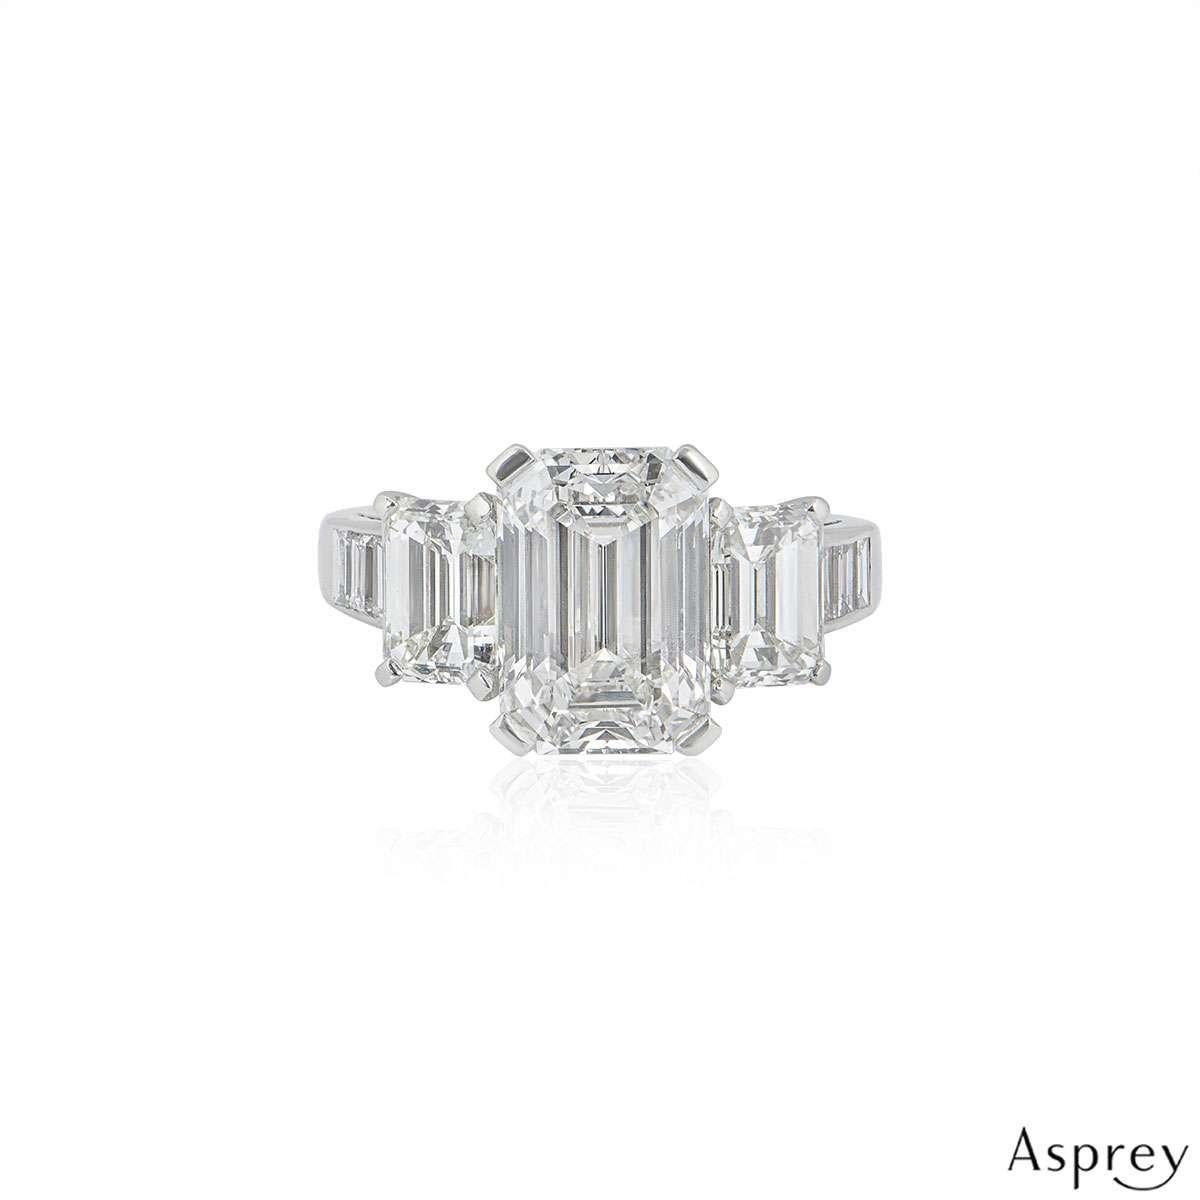 An exquisite diamond ring in platinum by Asprey. The ring is set to the centre with a 4.30ct emerald cut diamond in a classic 4 claw setting, the diamond is H colour and VVS2 in clarity. There are a further two, claw set emerald cut diamonds